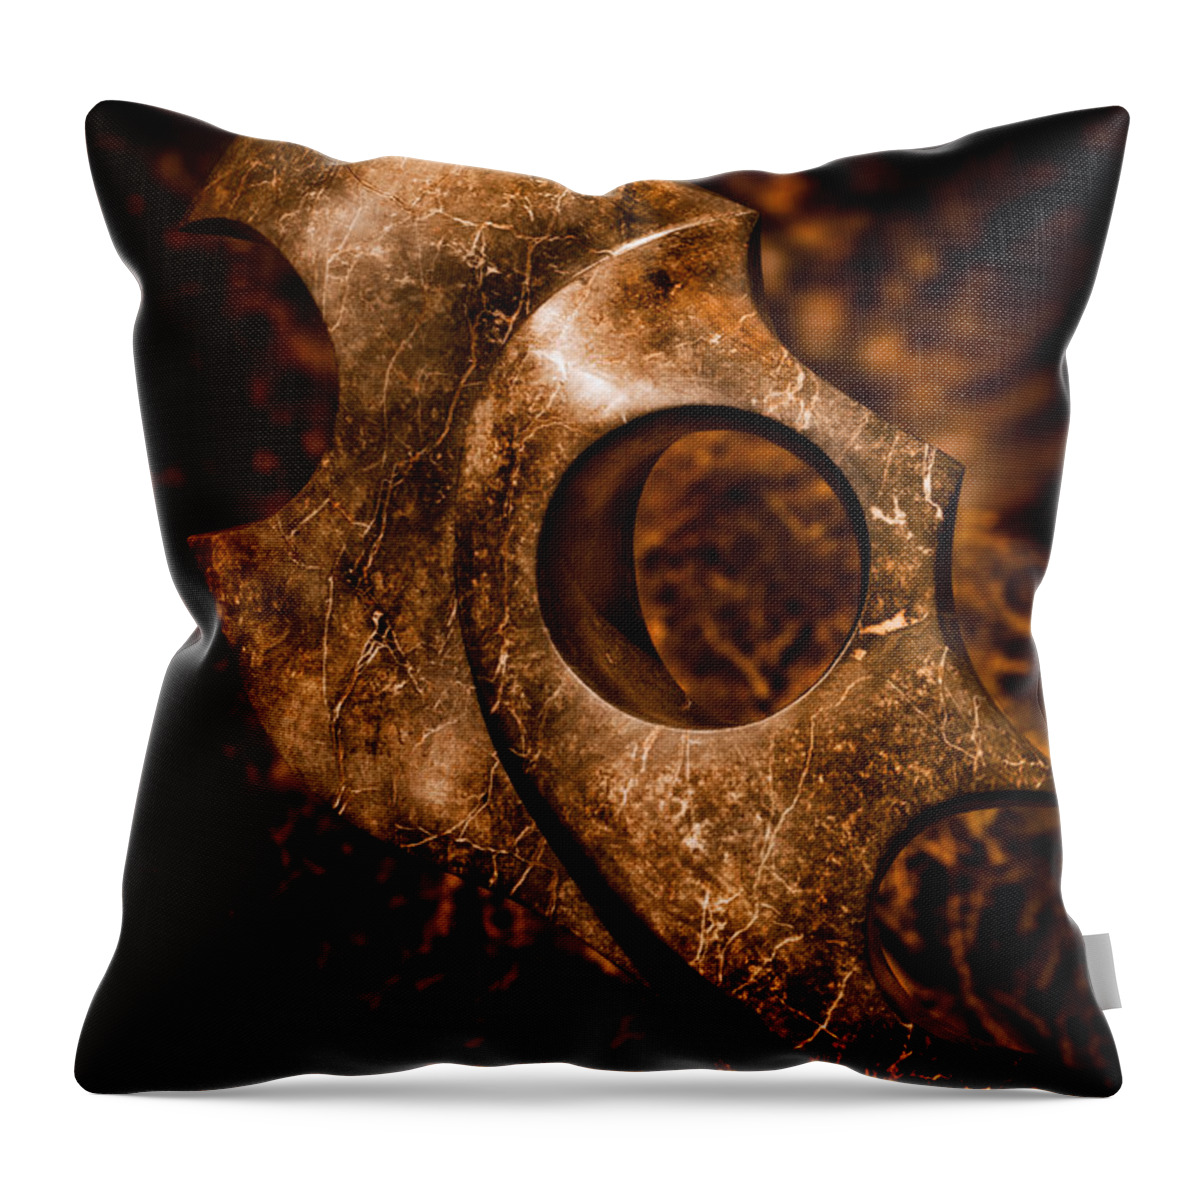 Art Throw Pillow featuring the photograph Spirits From Within by Venetta Archer